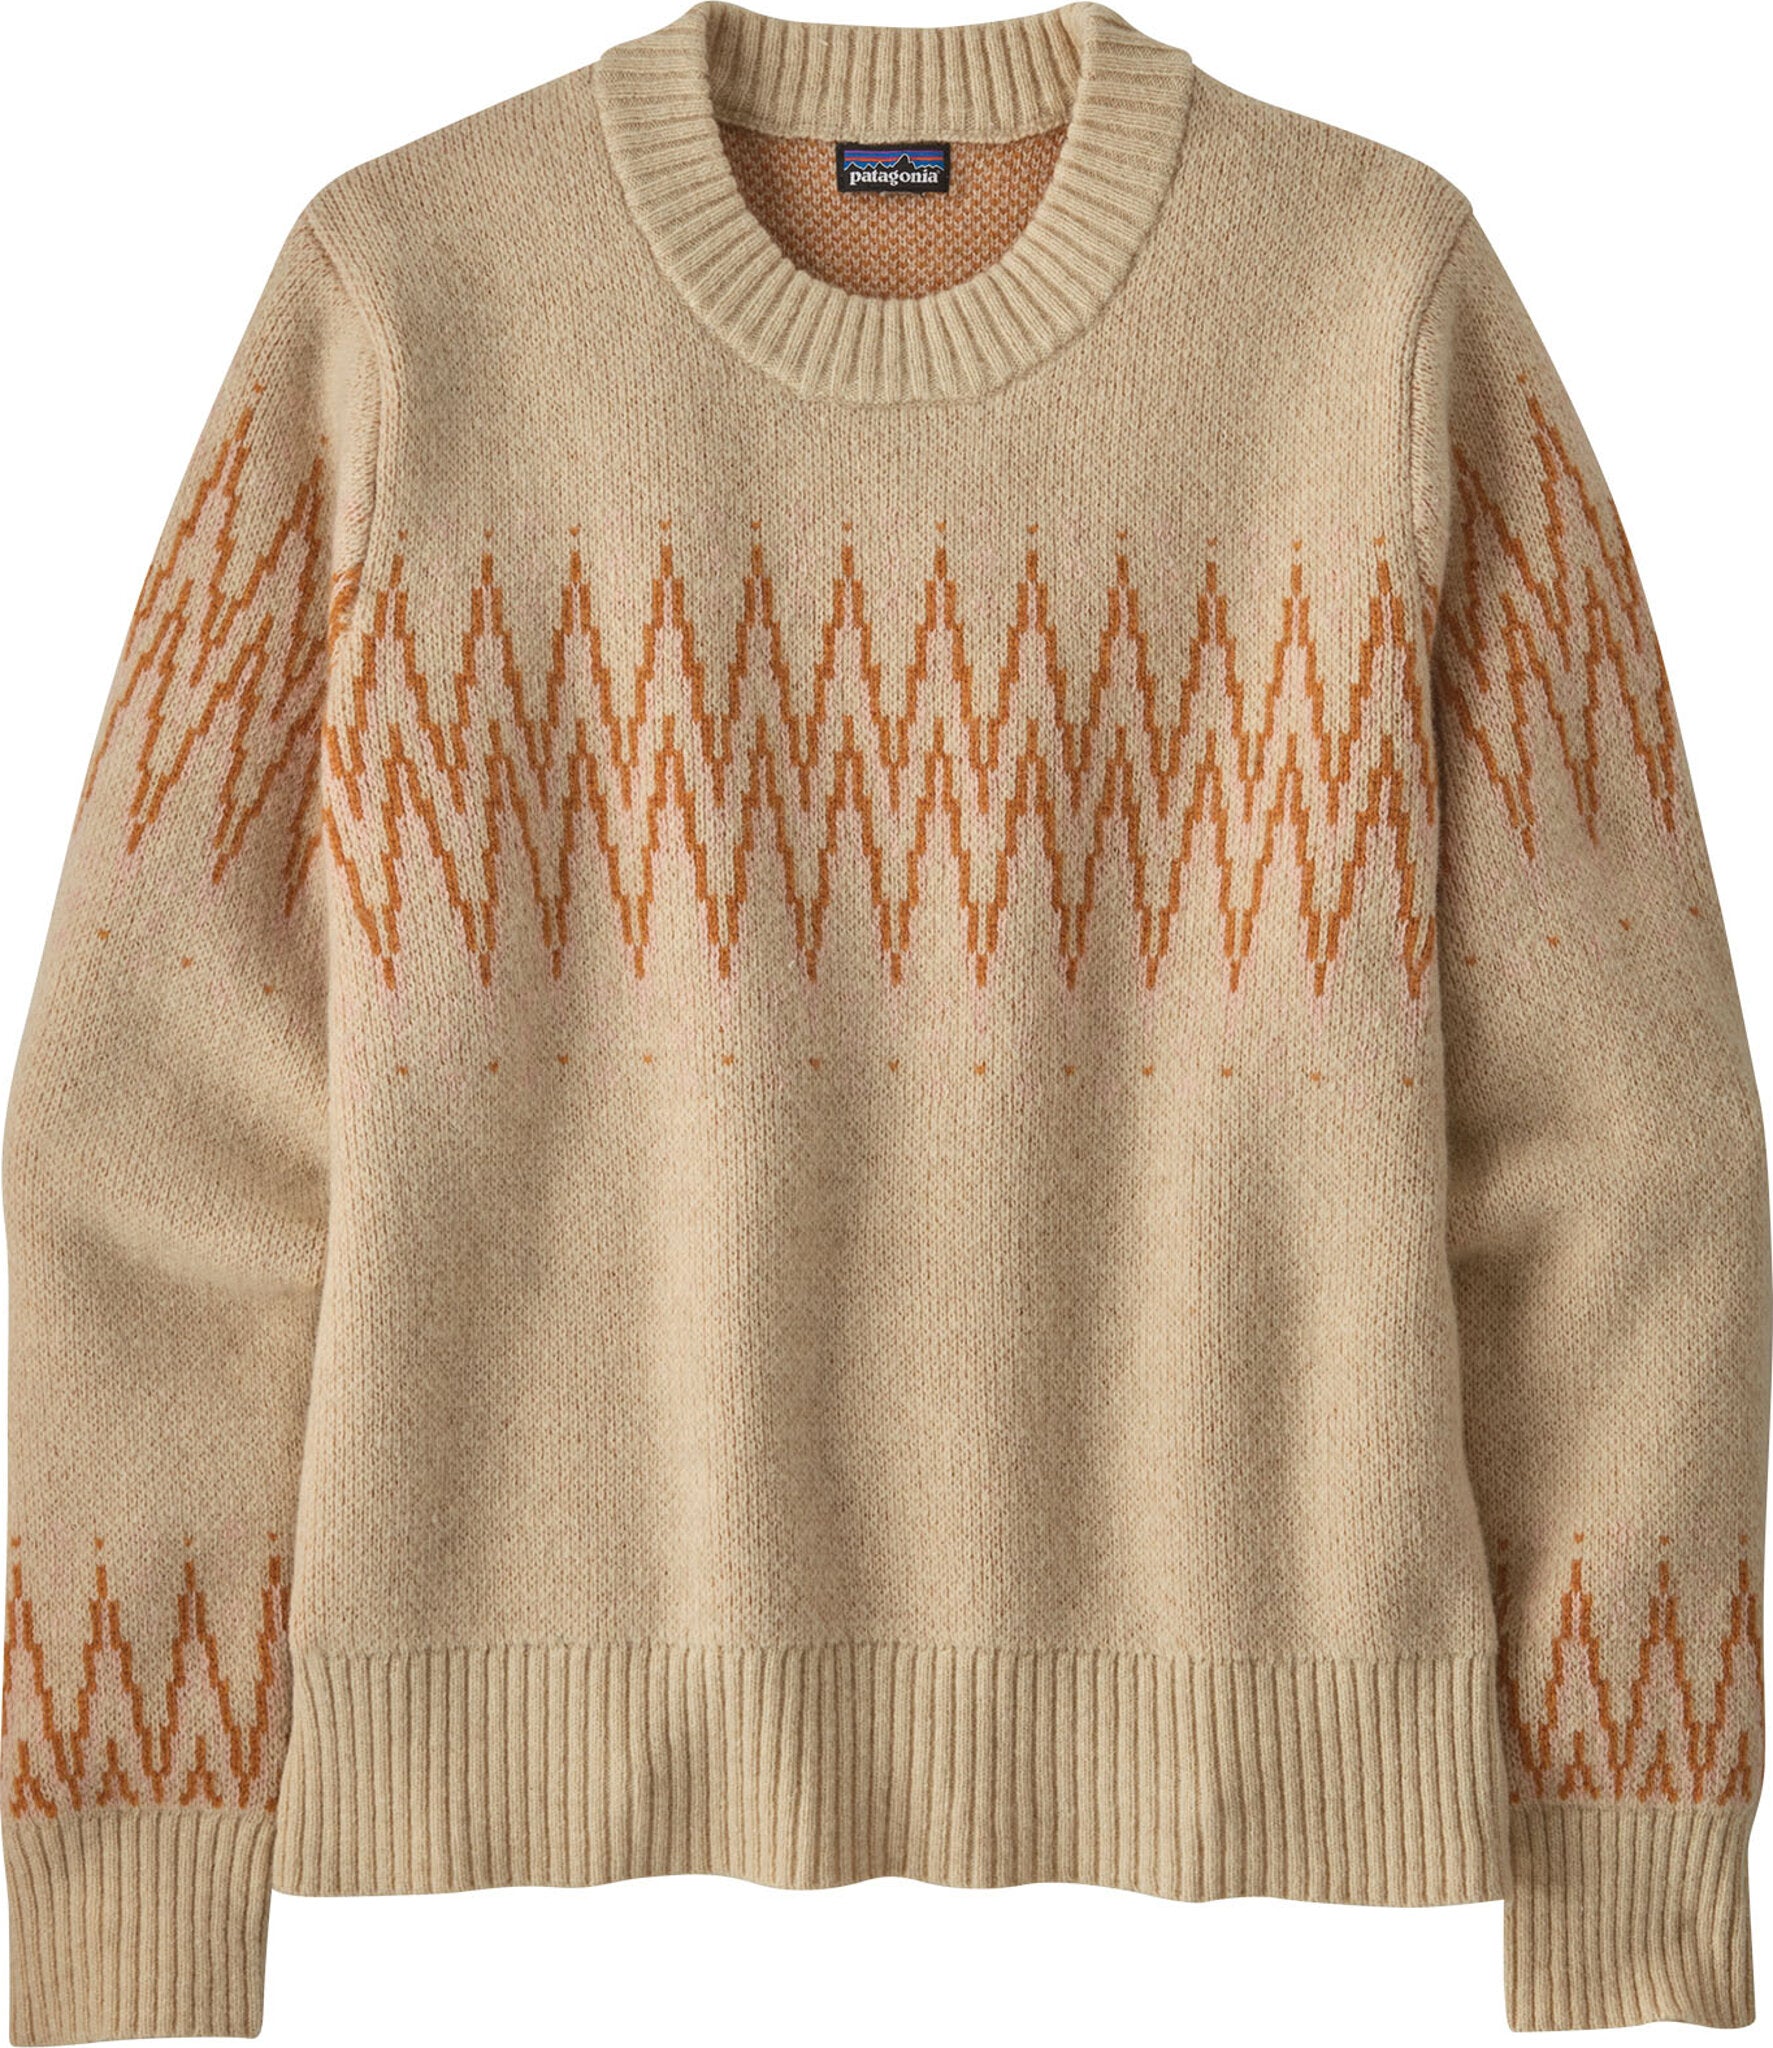 Patagonia Recycled Wool Cable-Knit Crewneck Sweater Natural - XL